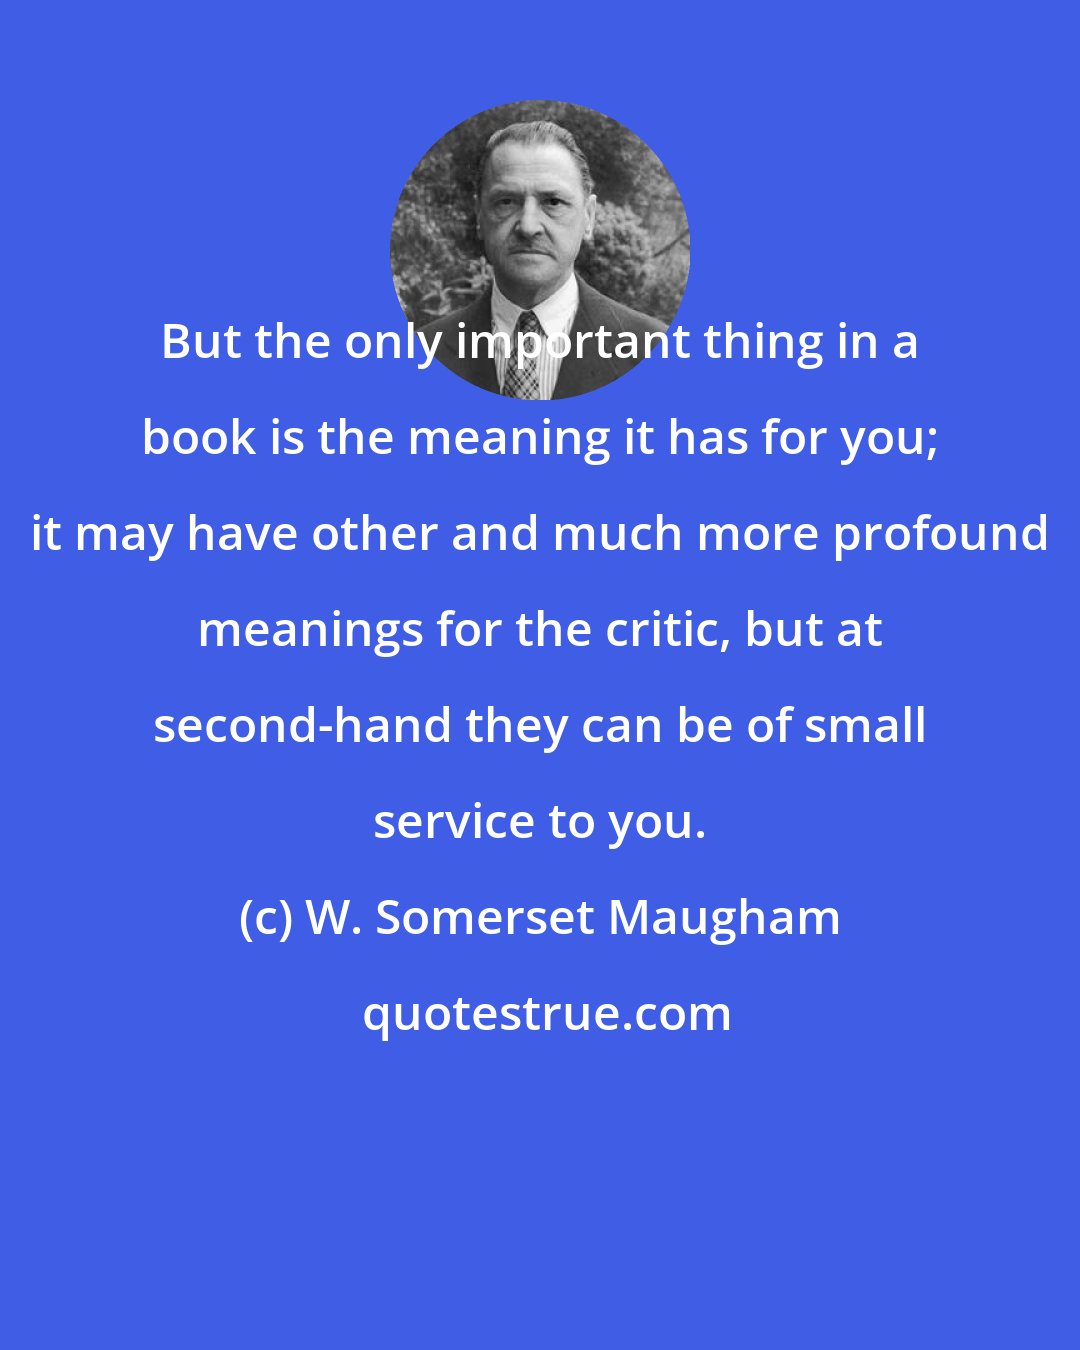 W. Somerset Maugham: But the only important thing in a book is the meaning it has for you; it may have other and much more profound meanings for the critic, but at second-hand they can be of small service to you.